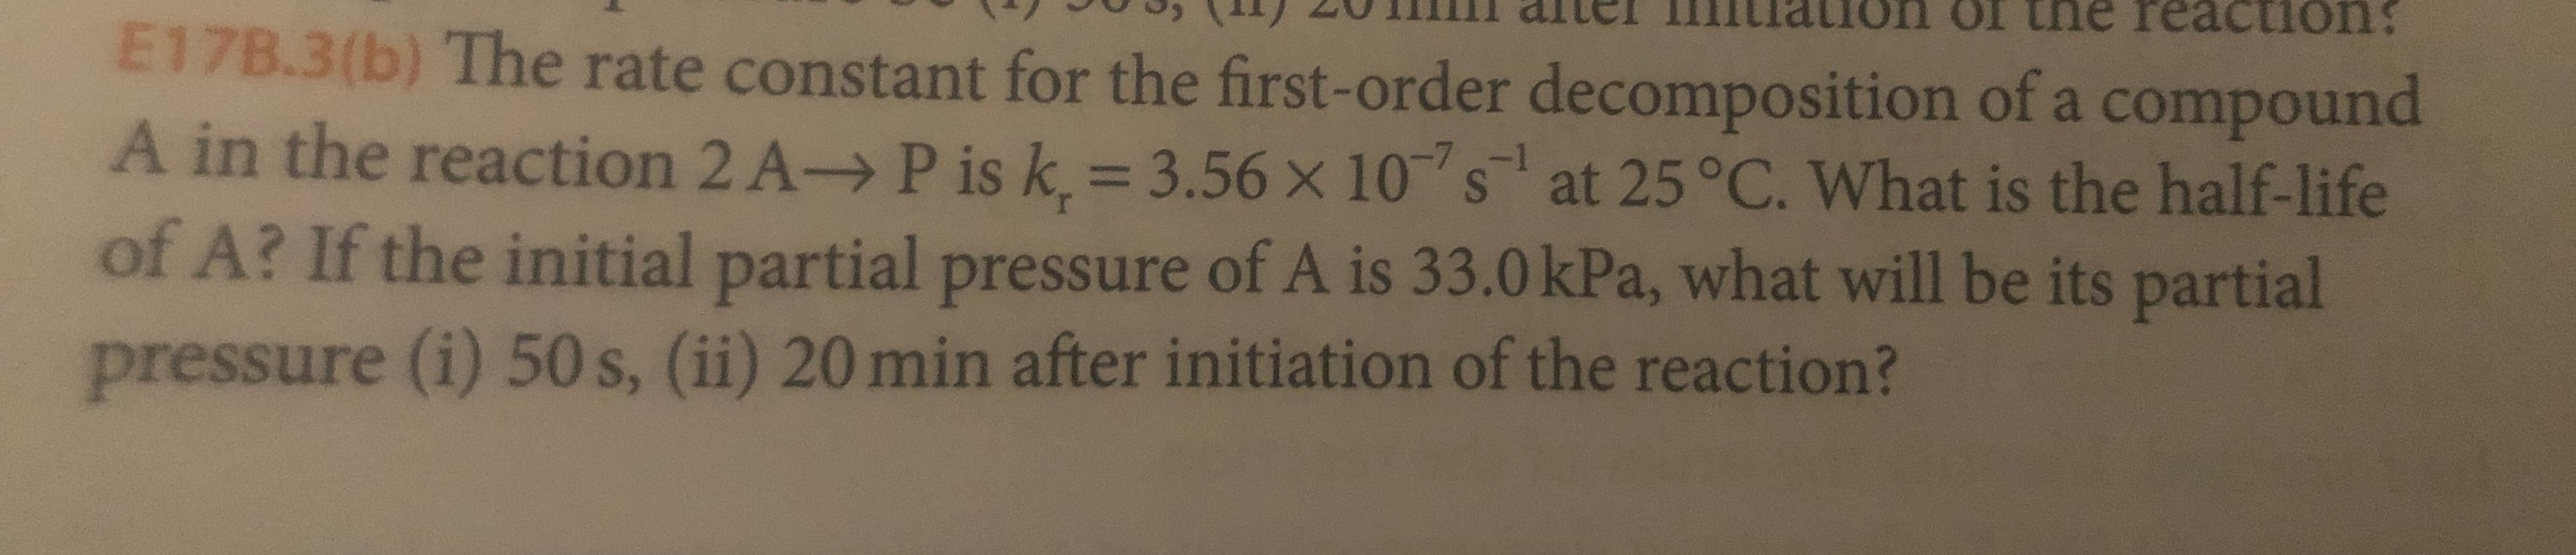 aion ol tne reaction
E17B.3(b) The rate constant for the first-order decomposition of a compound
A in the reaction 2 A-> P is k. 3.56 x 10s at 25 °C. What is the half-life
of A? If the initial partial pressure of A is 33.0 kPa, what will be its partial
pressure (i) 50 s, (ii) 20 min after initiation of the reaction?
